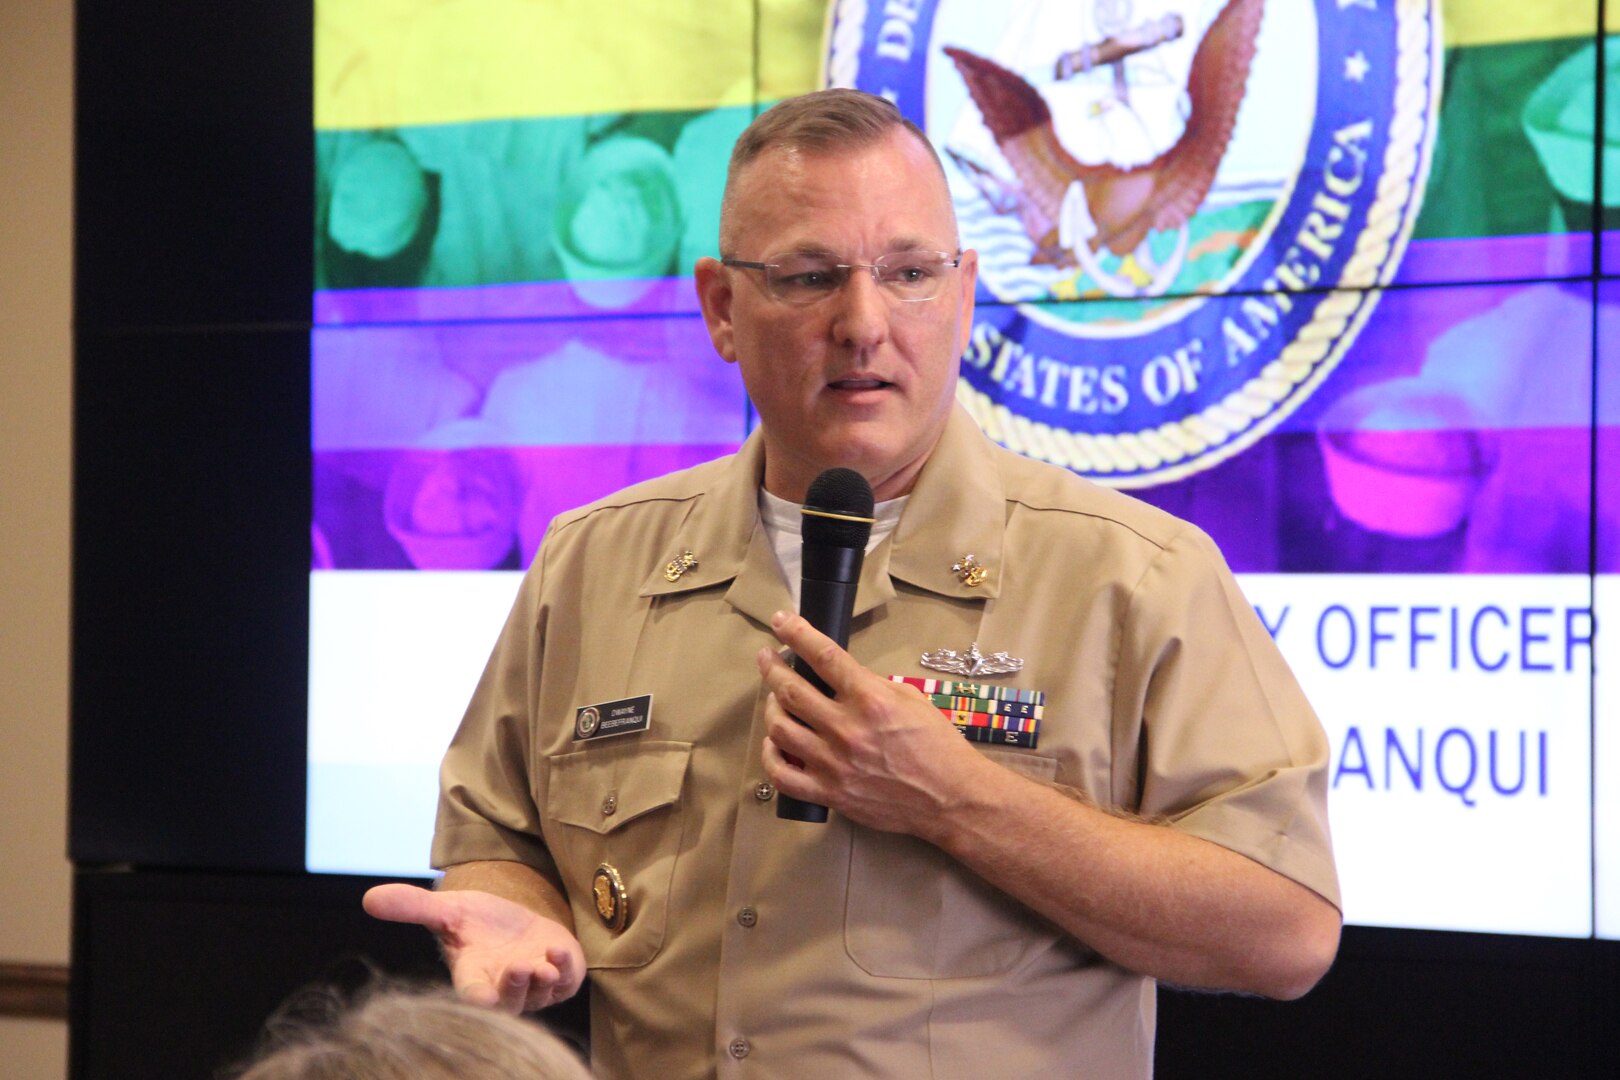 NSWC Crane hosted Master Chief Petty Officer Dwayne D. Beebe-Franqui on June 25 as the guest speaker at the Lesbian, Bisexual, Transgender, Queer, plus Allies (LGBTQ+A) Pride Month Luncheon. Beebe-Franqui spoke about his experience in the military while serving in the Navy under the Don’t Ask, Don’t Tell (DADT) policy, which allowed LGBTQ Americans to serve in the armed forces – as long as they hid their orientation or identity from everyone.